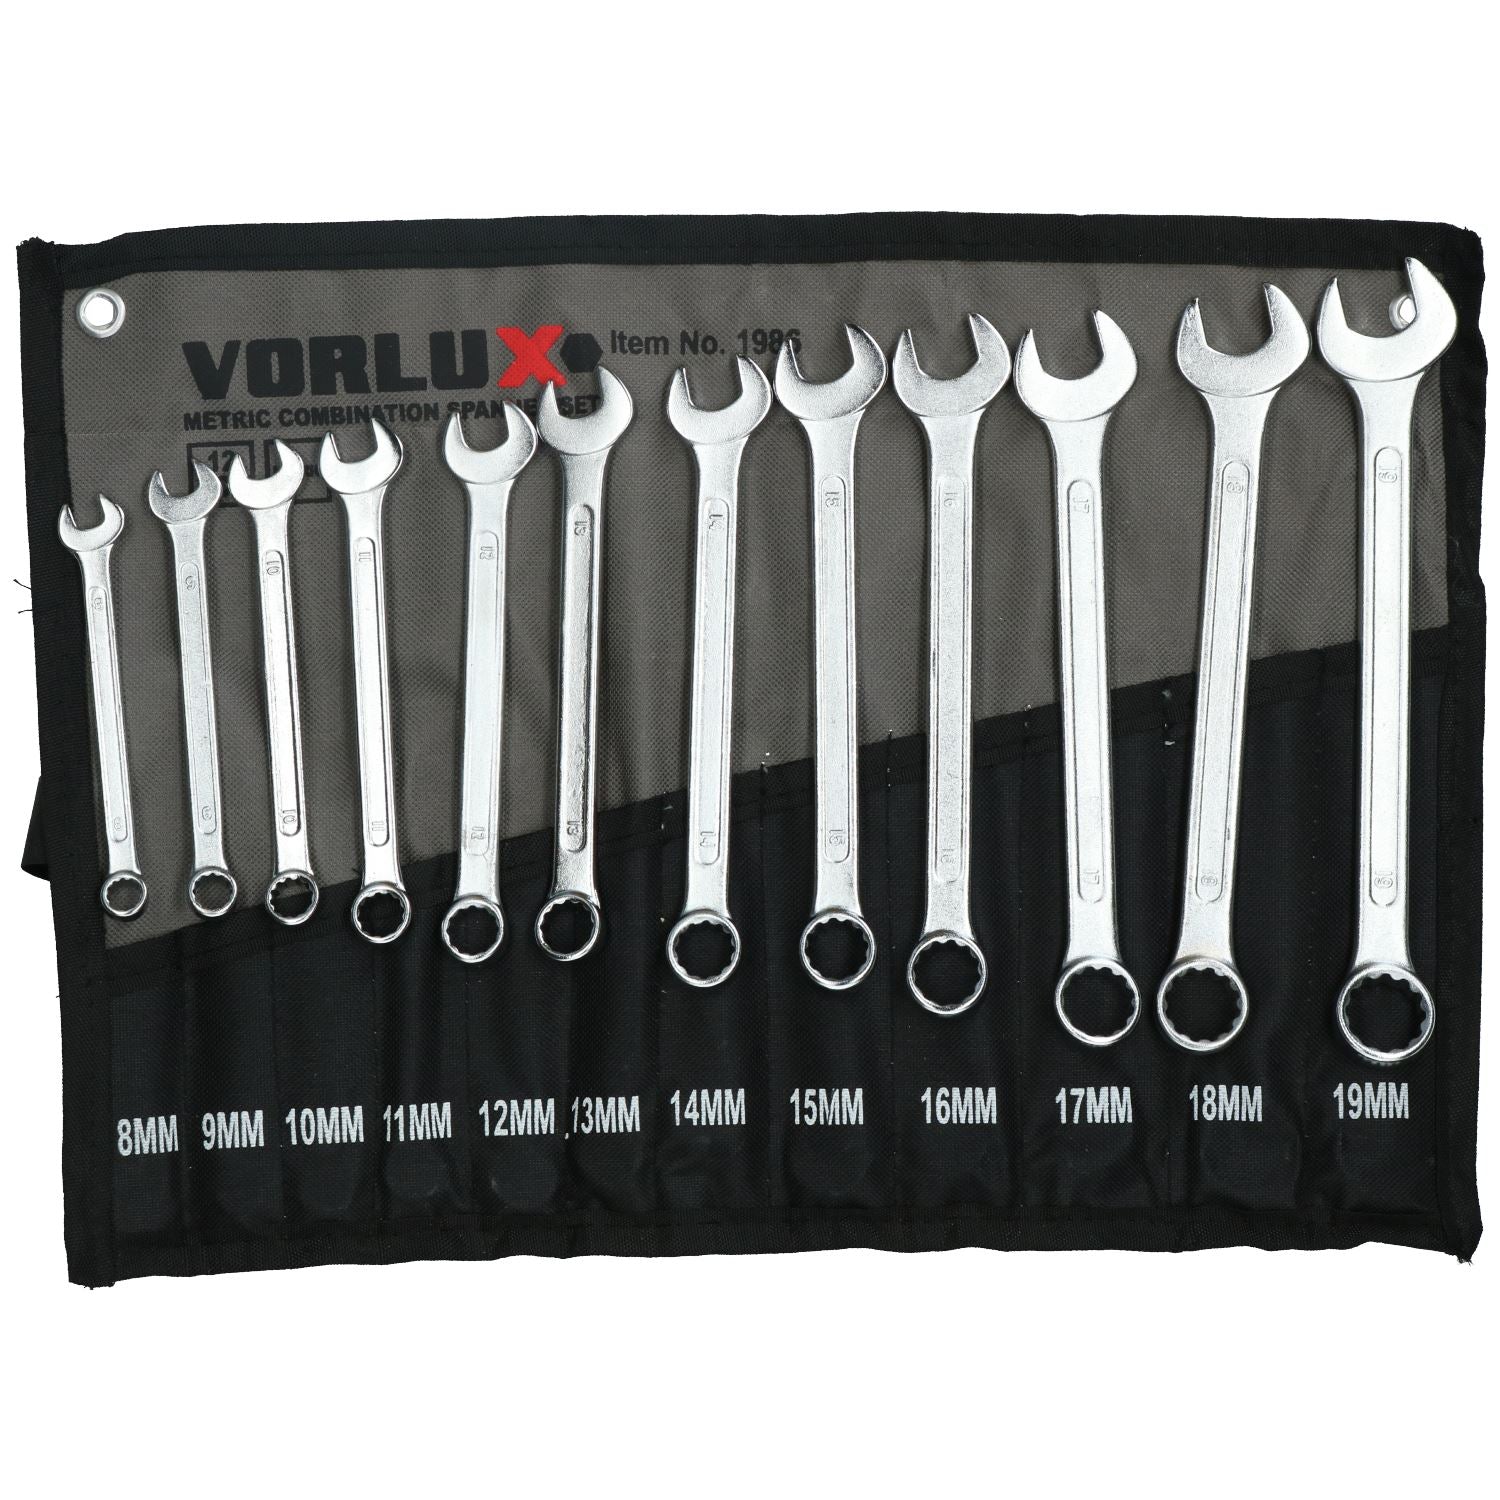 Metric Combination Spanner Set Wrench Ring Open Ended 8mm - 19mm 12pc